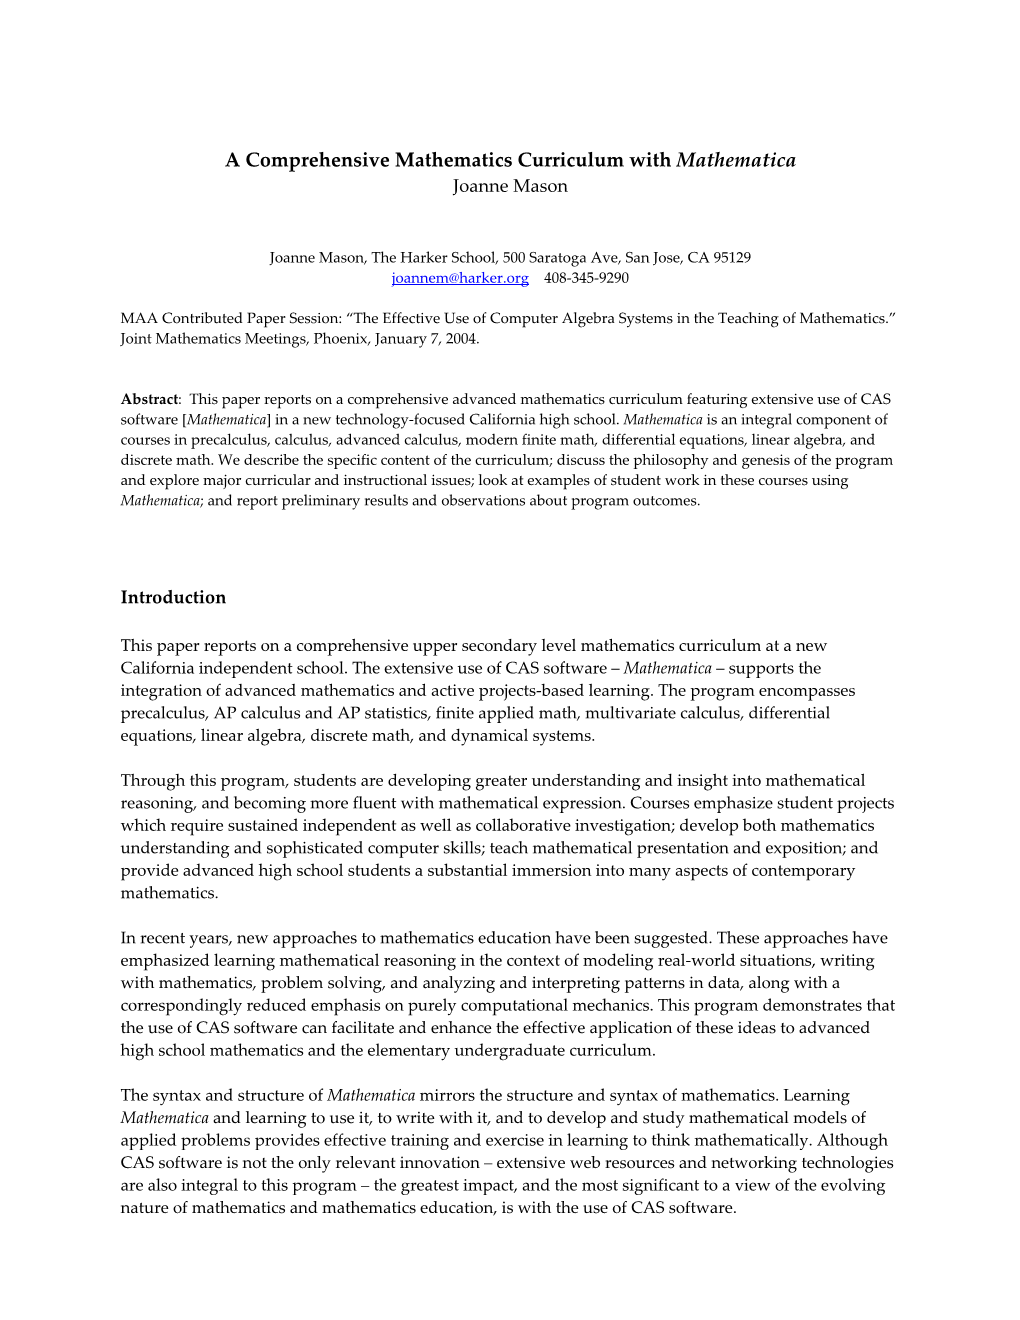 This Paper Reports on a Comprehensive Upper Secondary Level Mathematics Curriculum at a New California Independent School